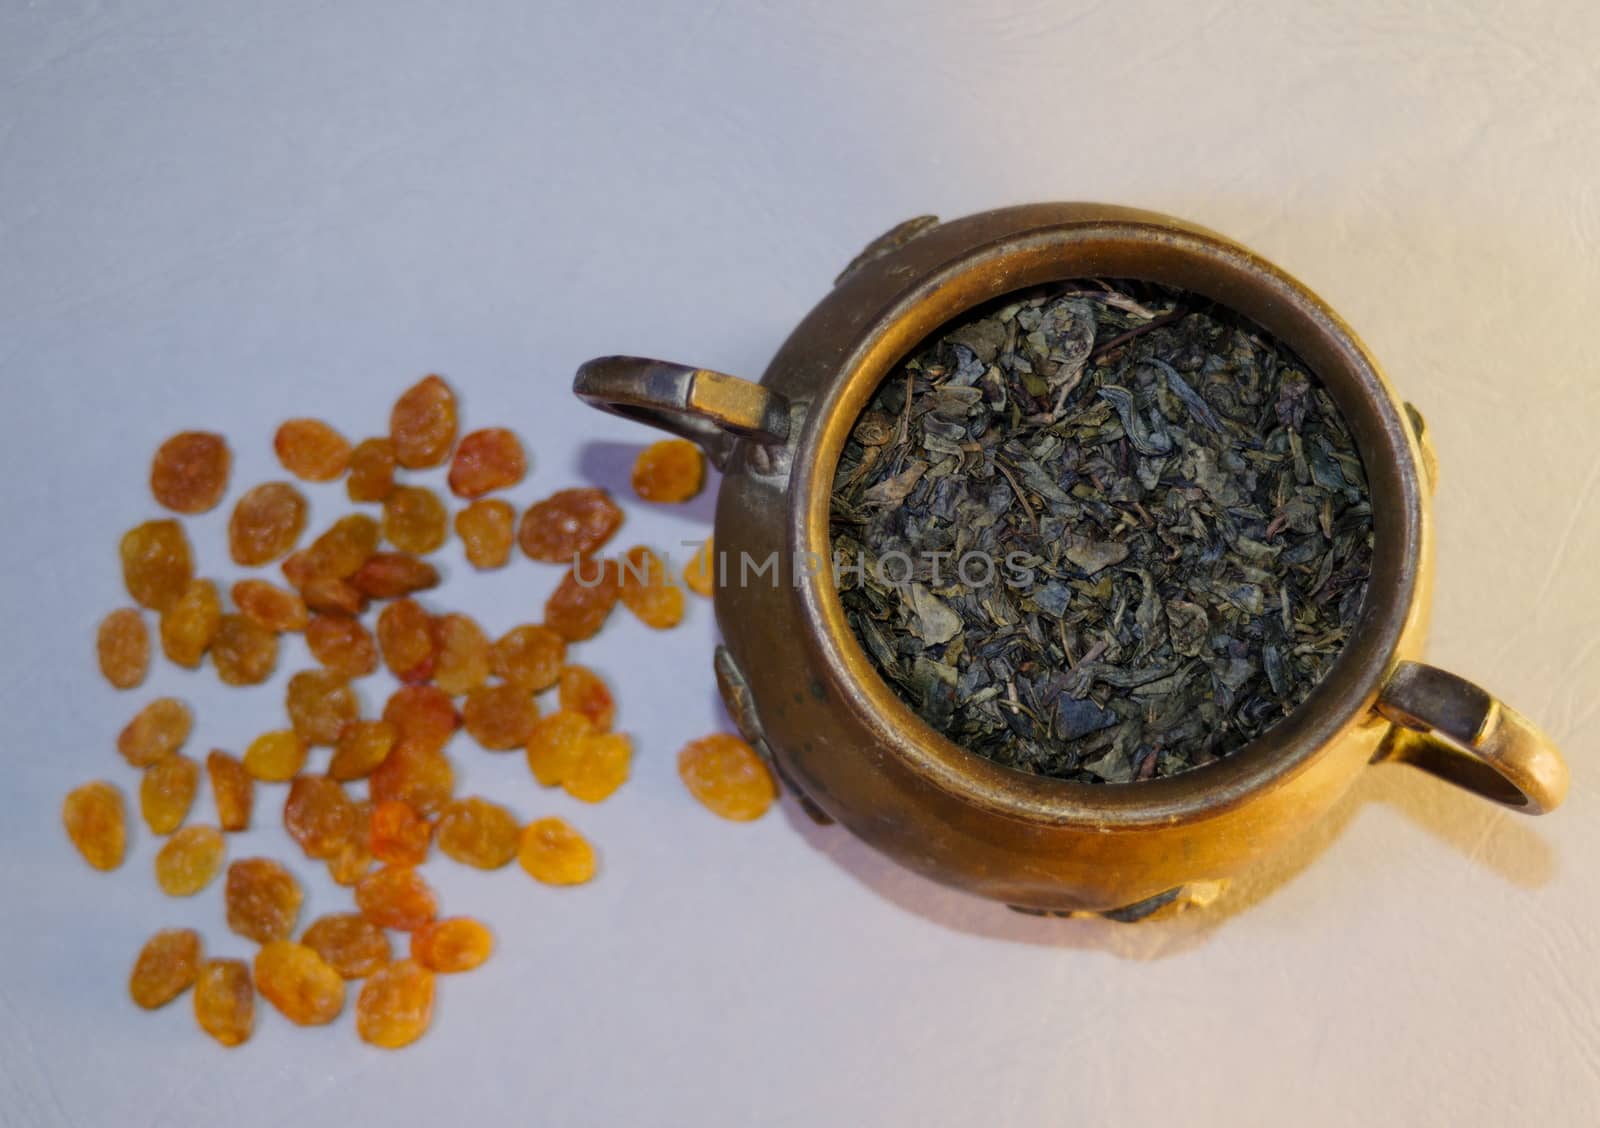 copper vase with large leaf tea next to scattered raisins on a light background